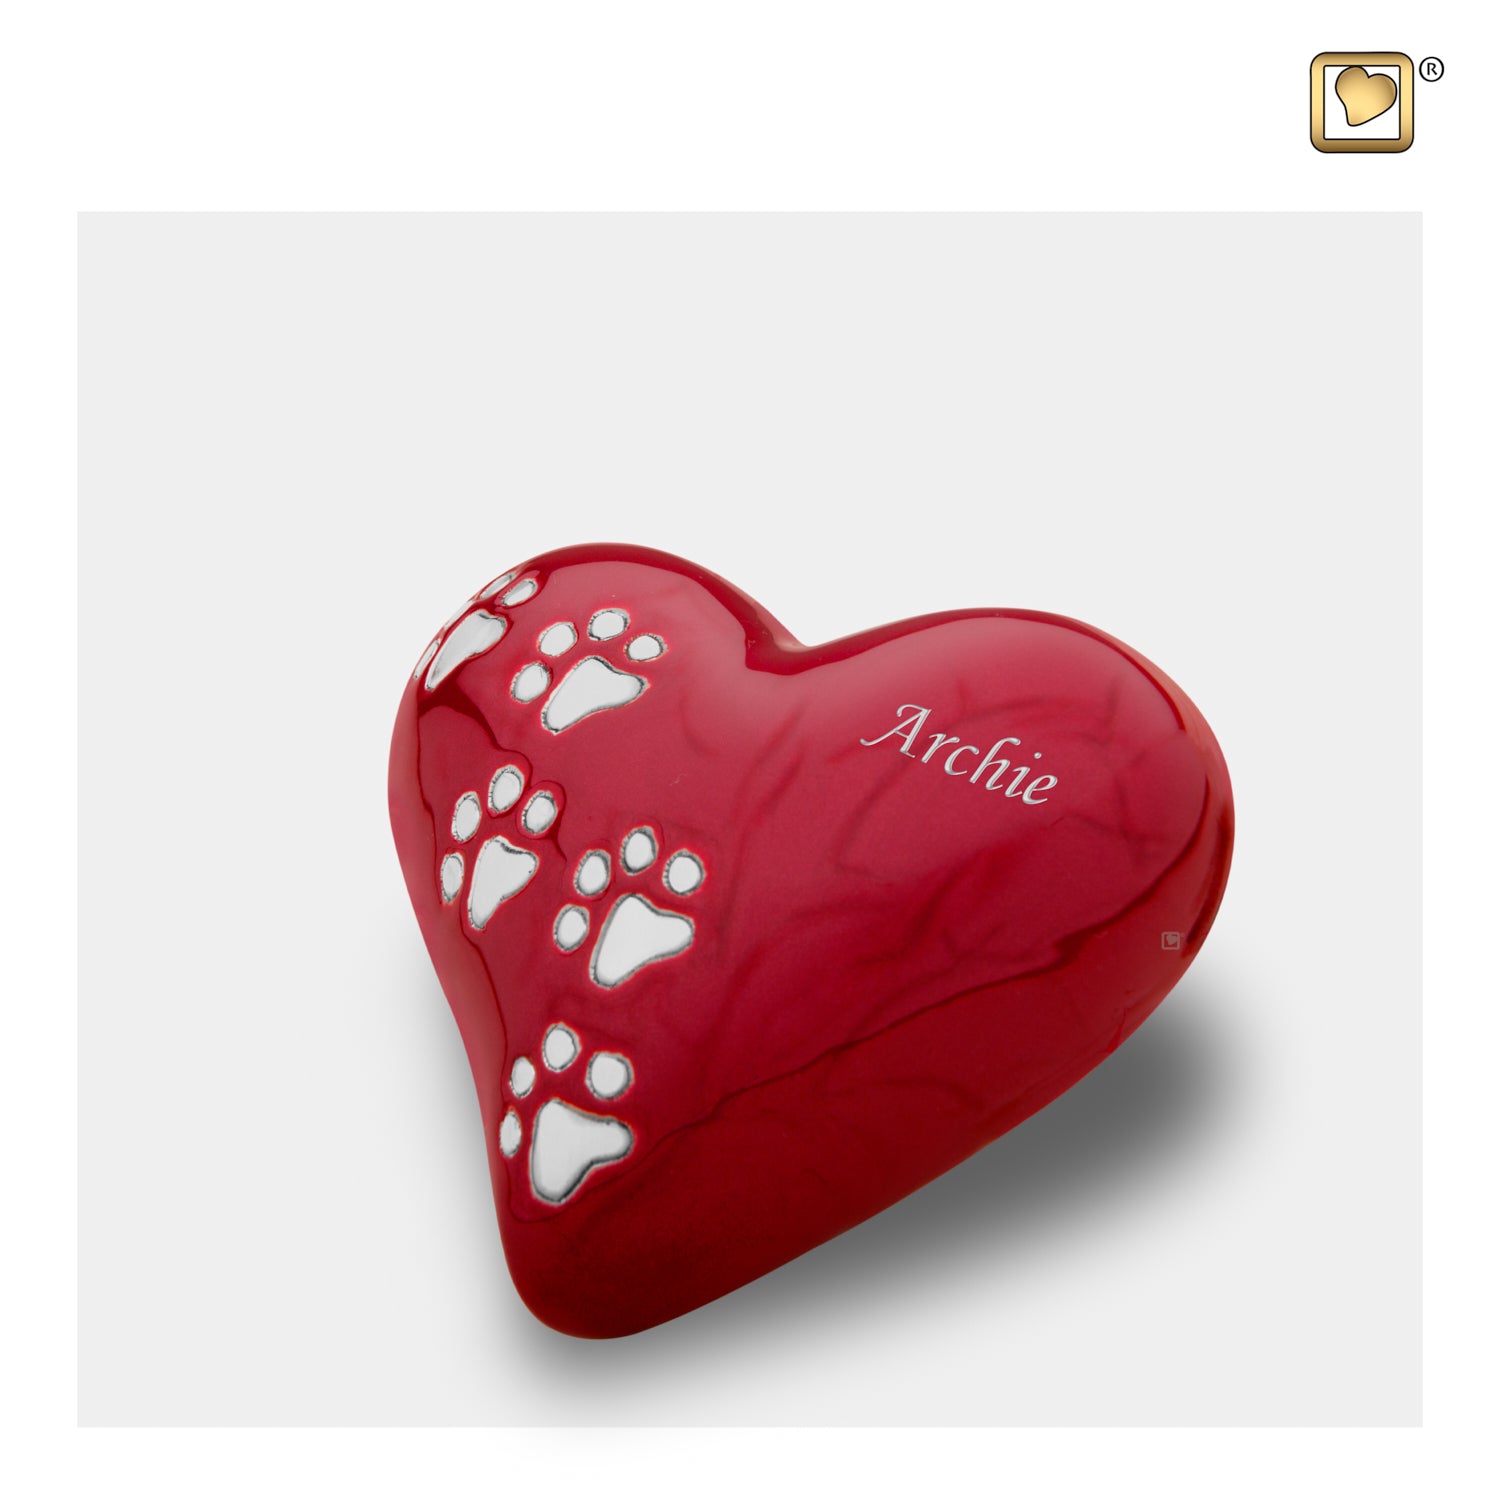 LovePaws™ Heart Pearlesecent Red Keepsake Pet Cremation Urn